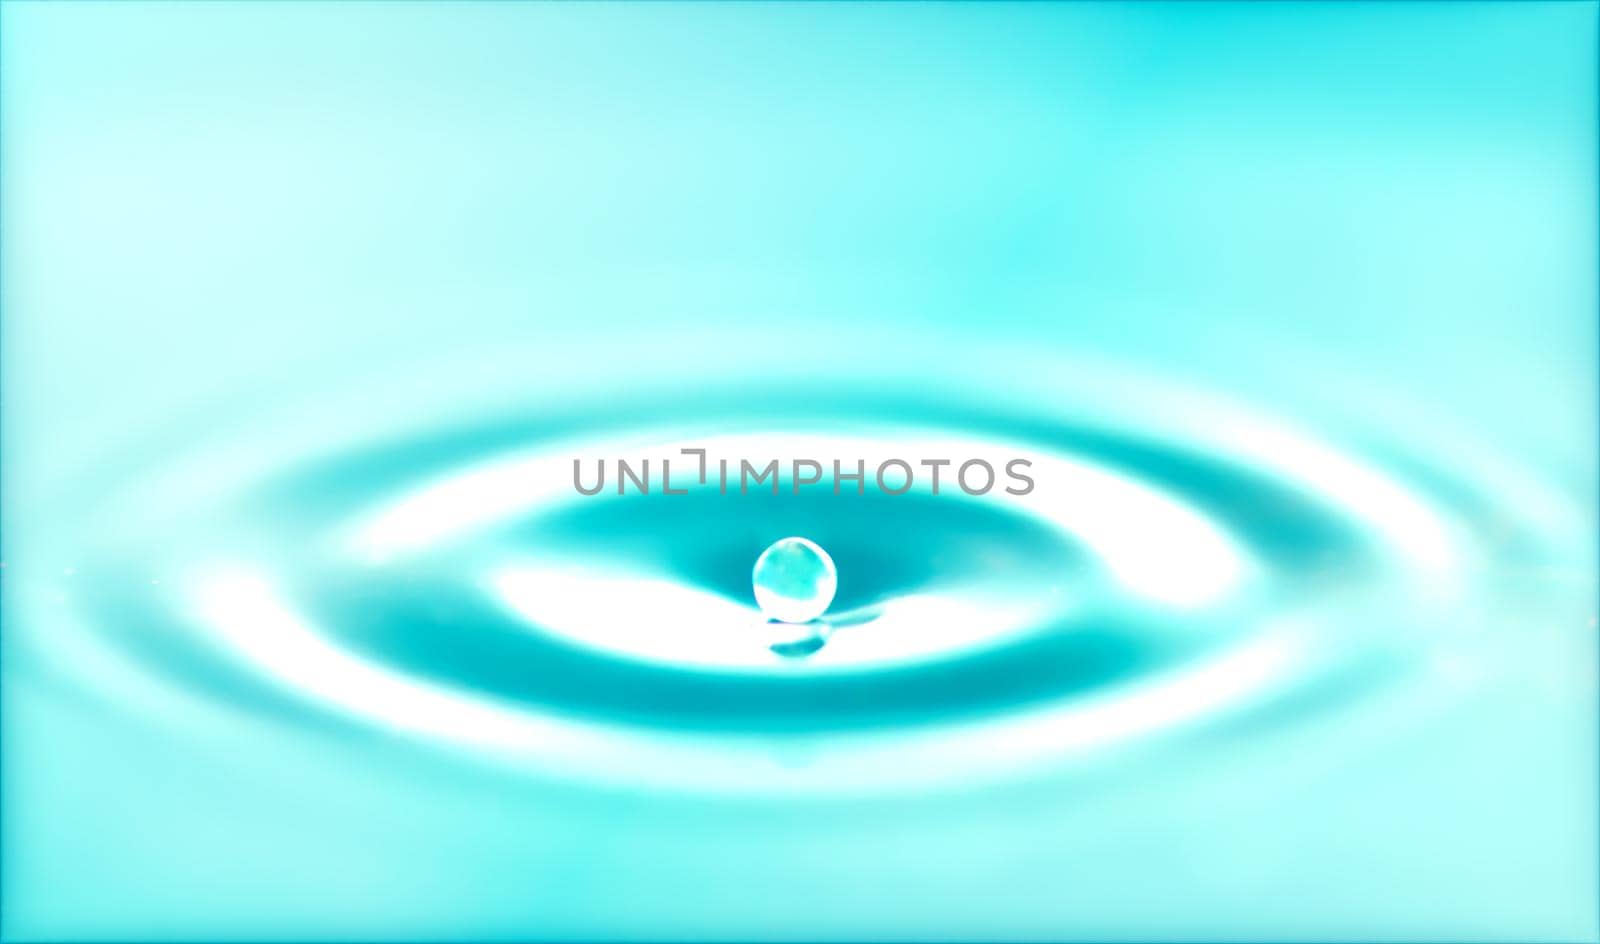 Abstract Water Drop Sphere Background Image Blue Tone Select Focus Water Drop